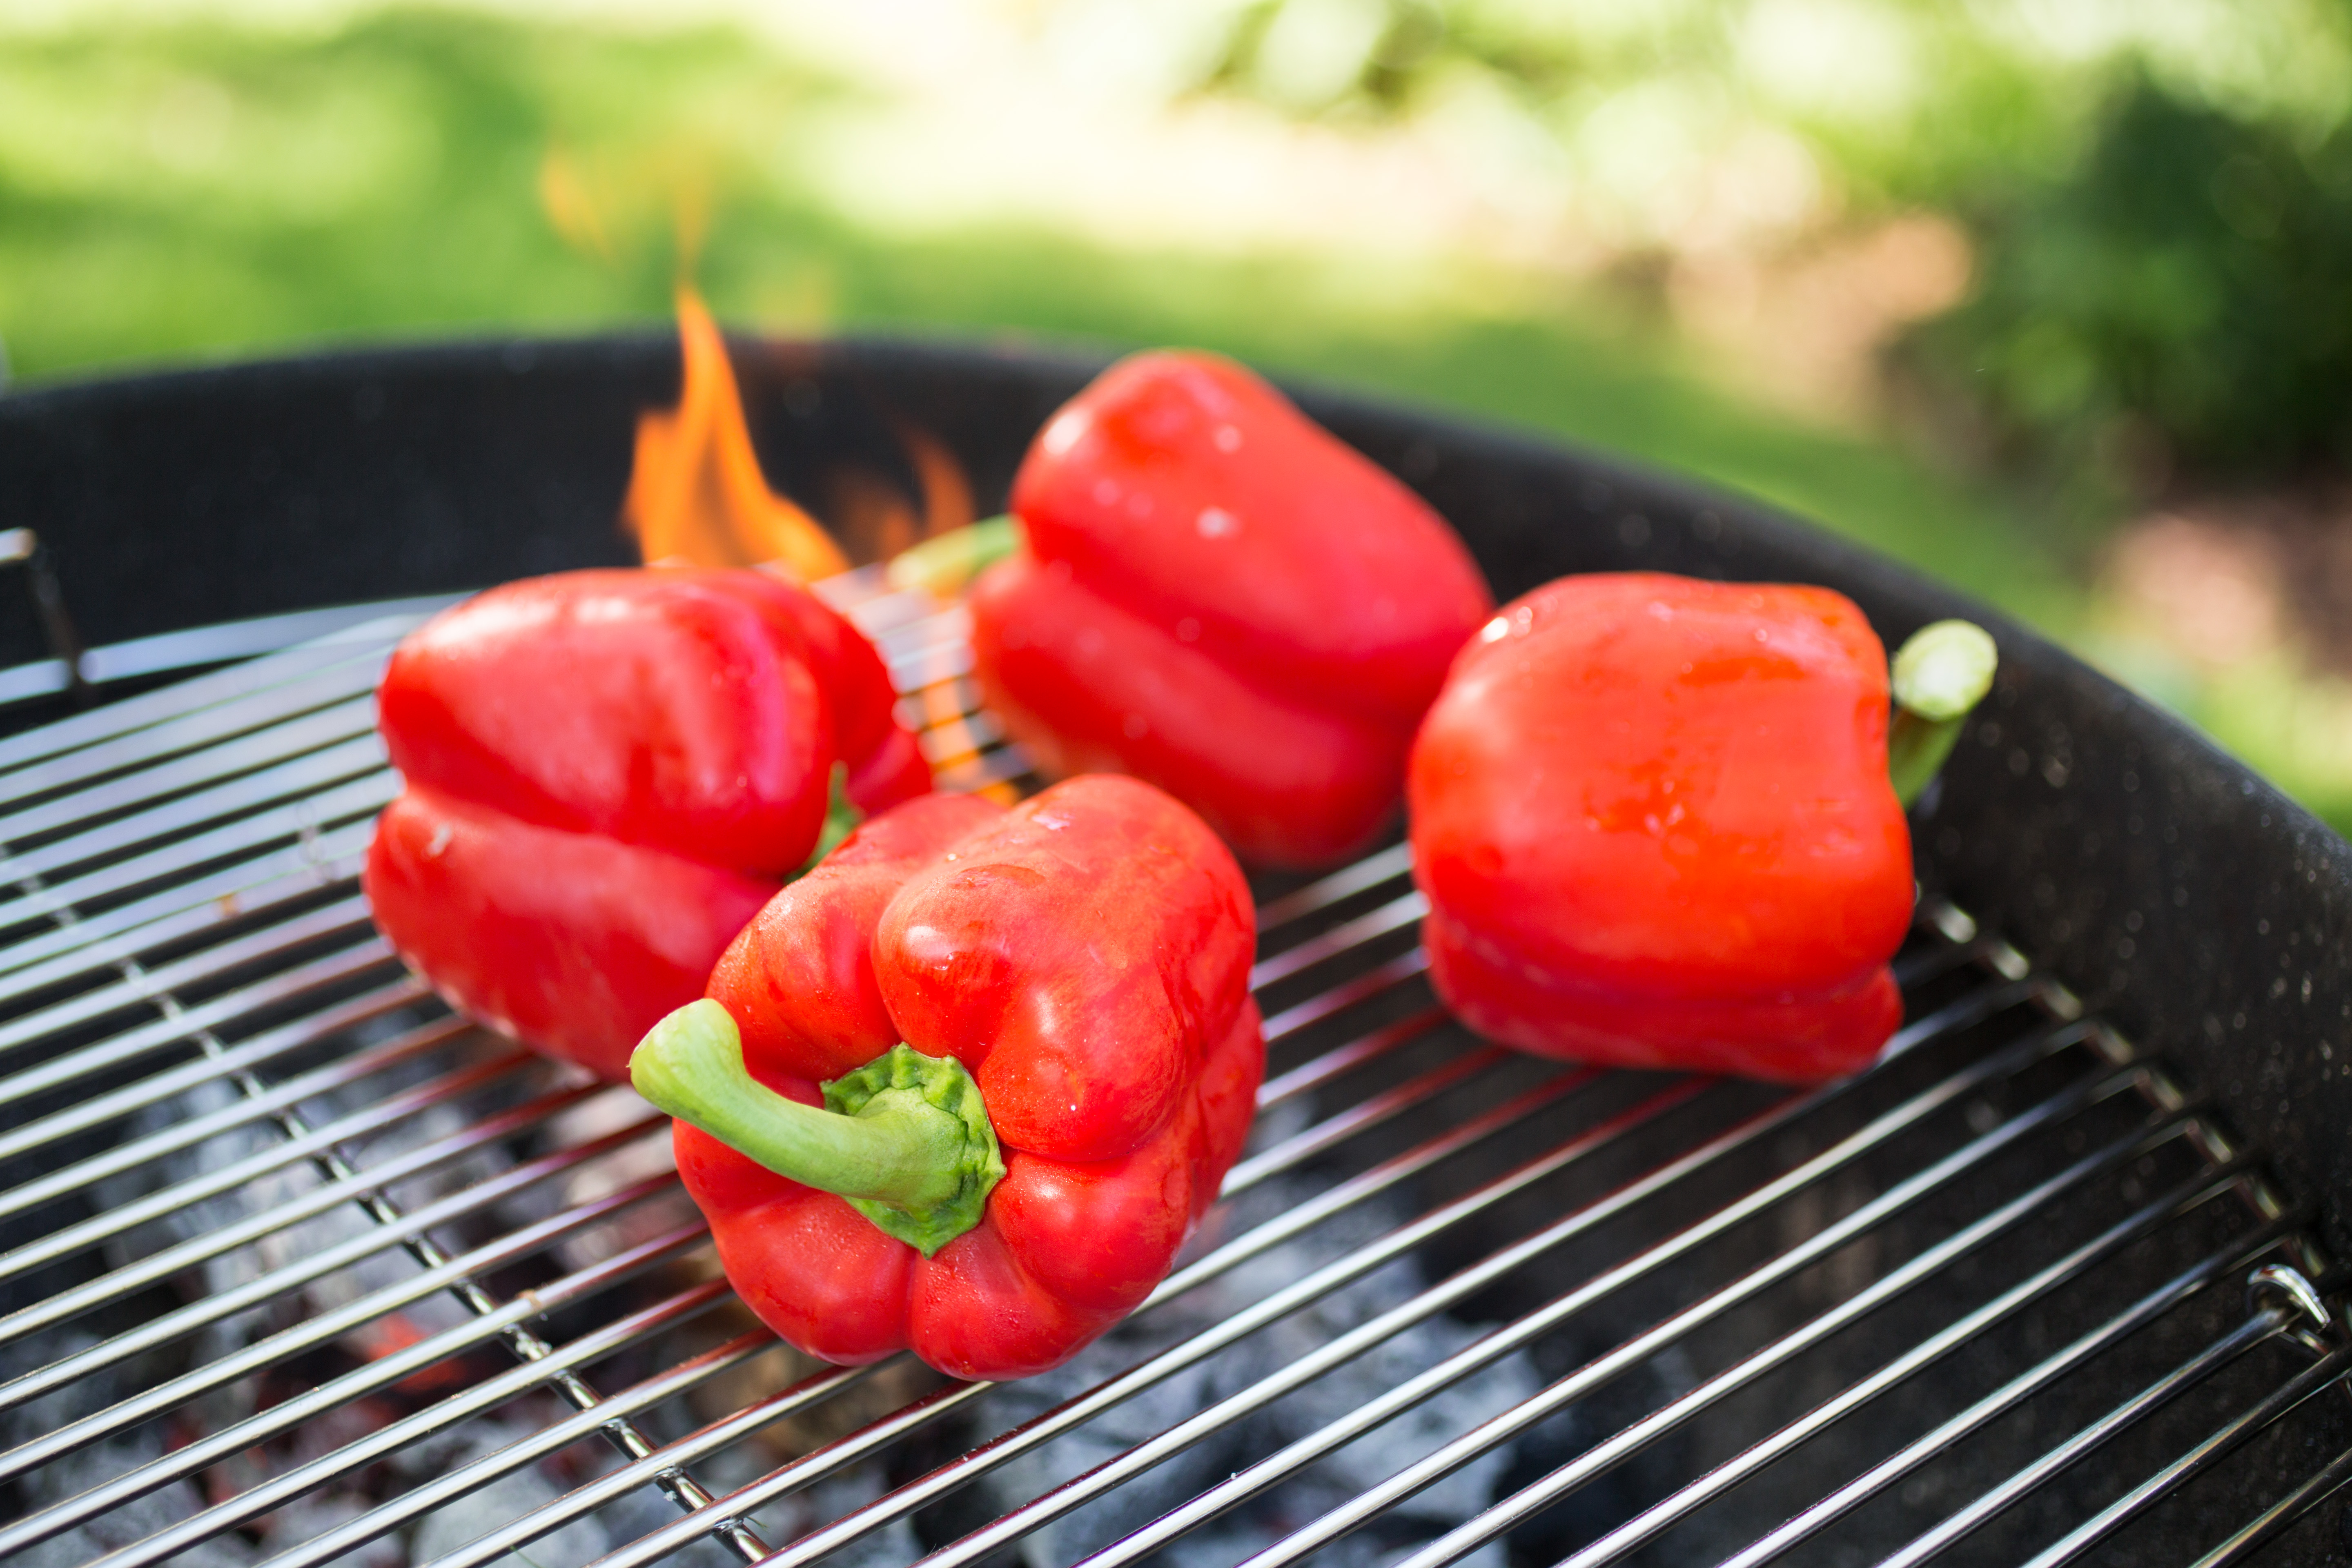 Fire Roasted Sweet Red Bell Peppers